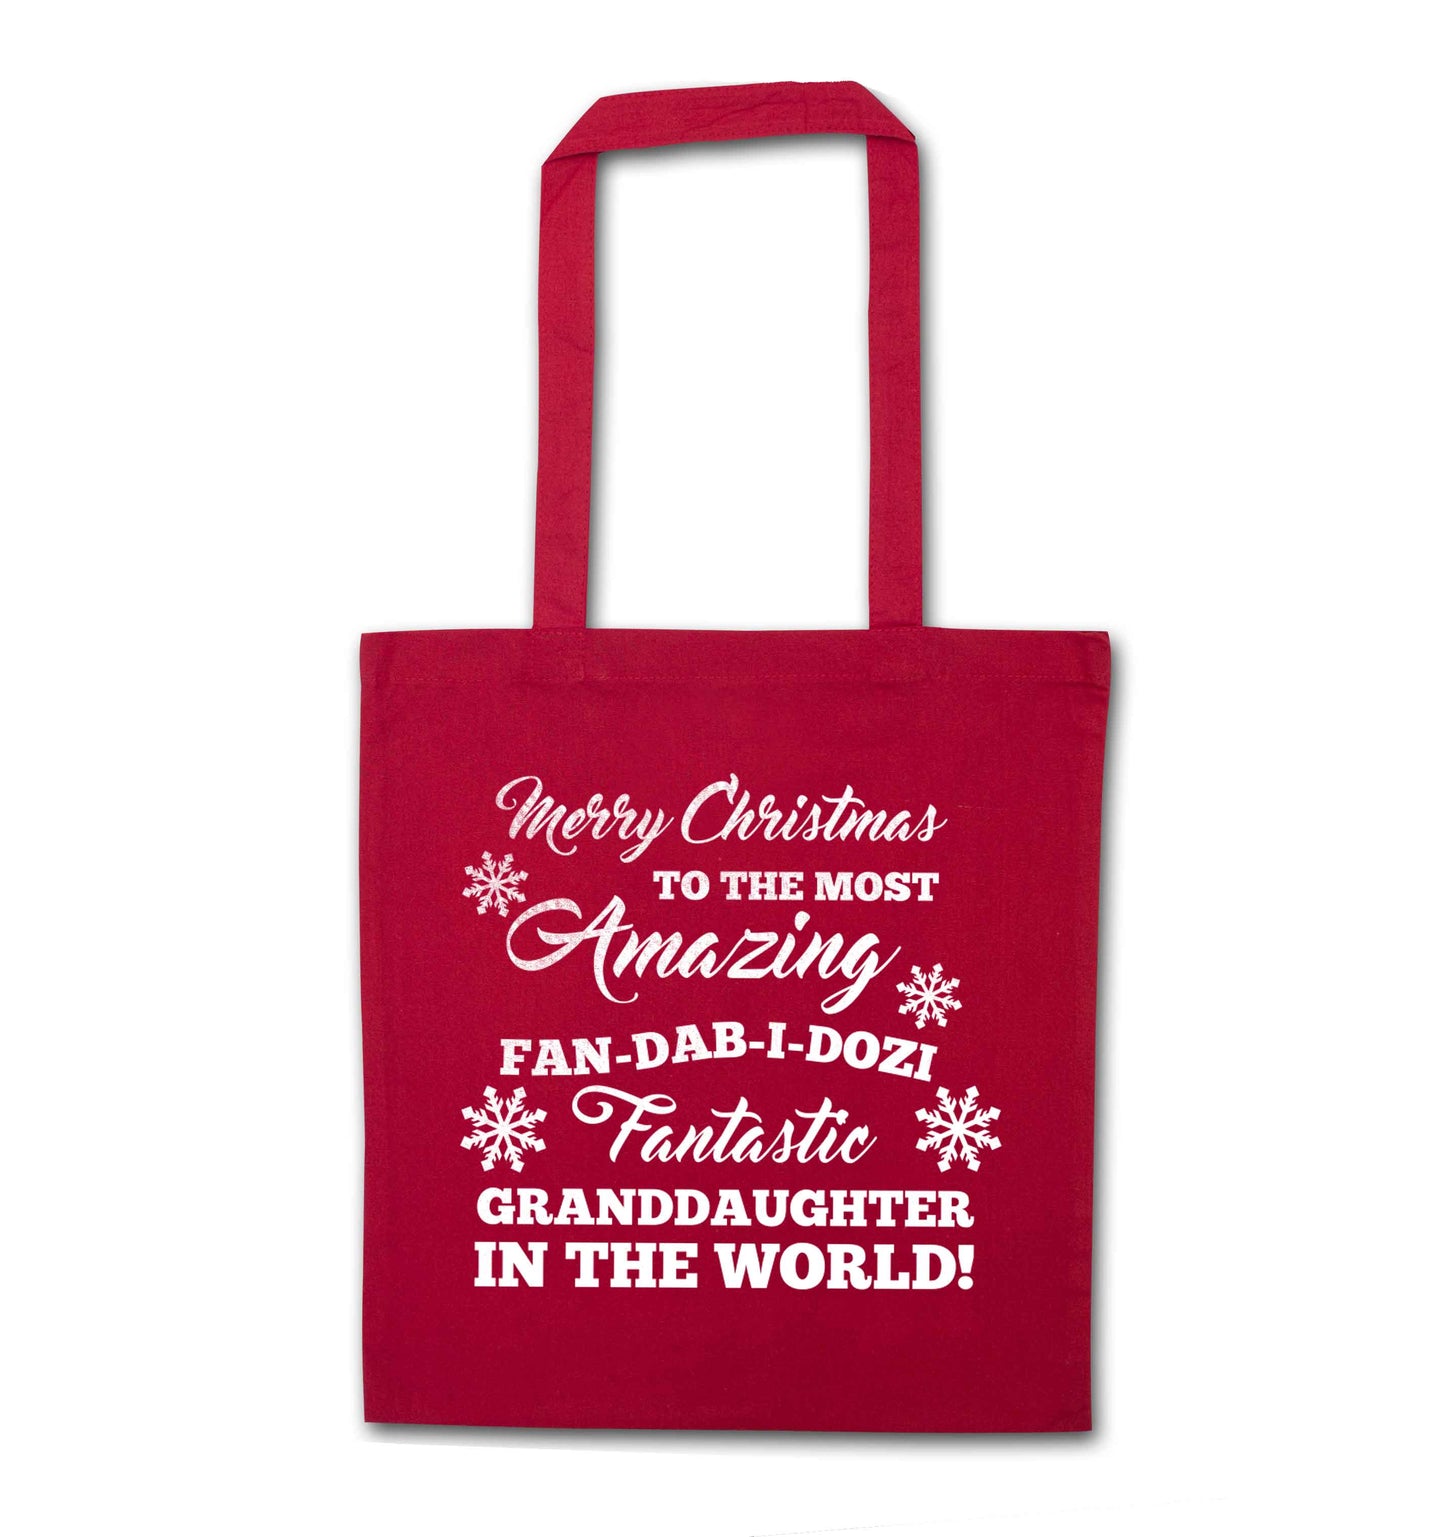 Merry Christmas to the most amazing fan-dab-i-dozi fantasic Granddaughter in the world red tote bag